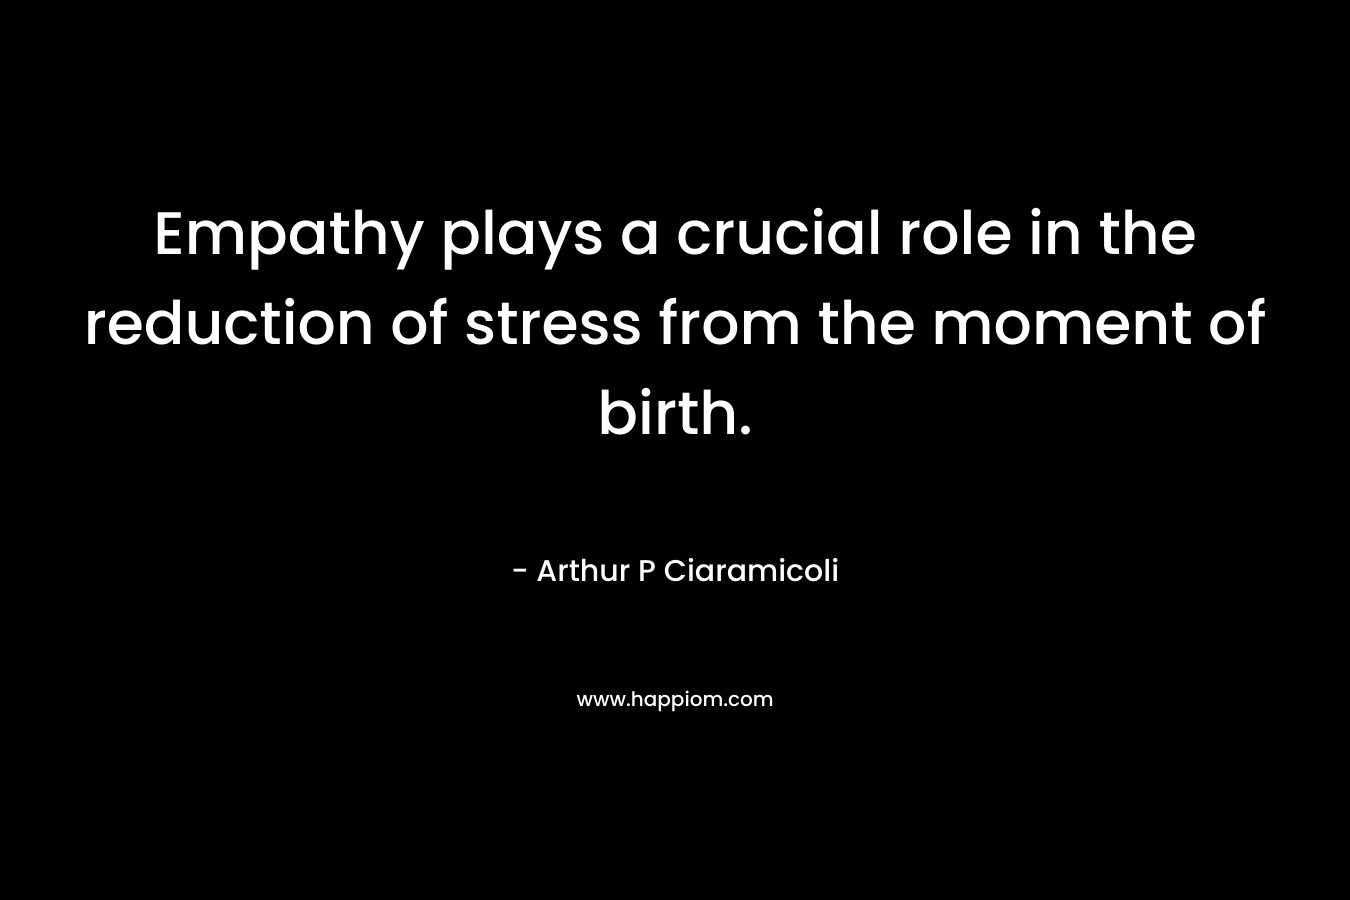 Empathy plays a crucial role in the reduction of stress from the moment of birth. – Arthur P Ciaramicoli